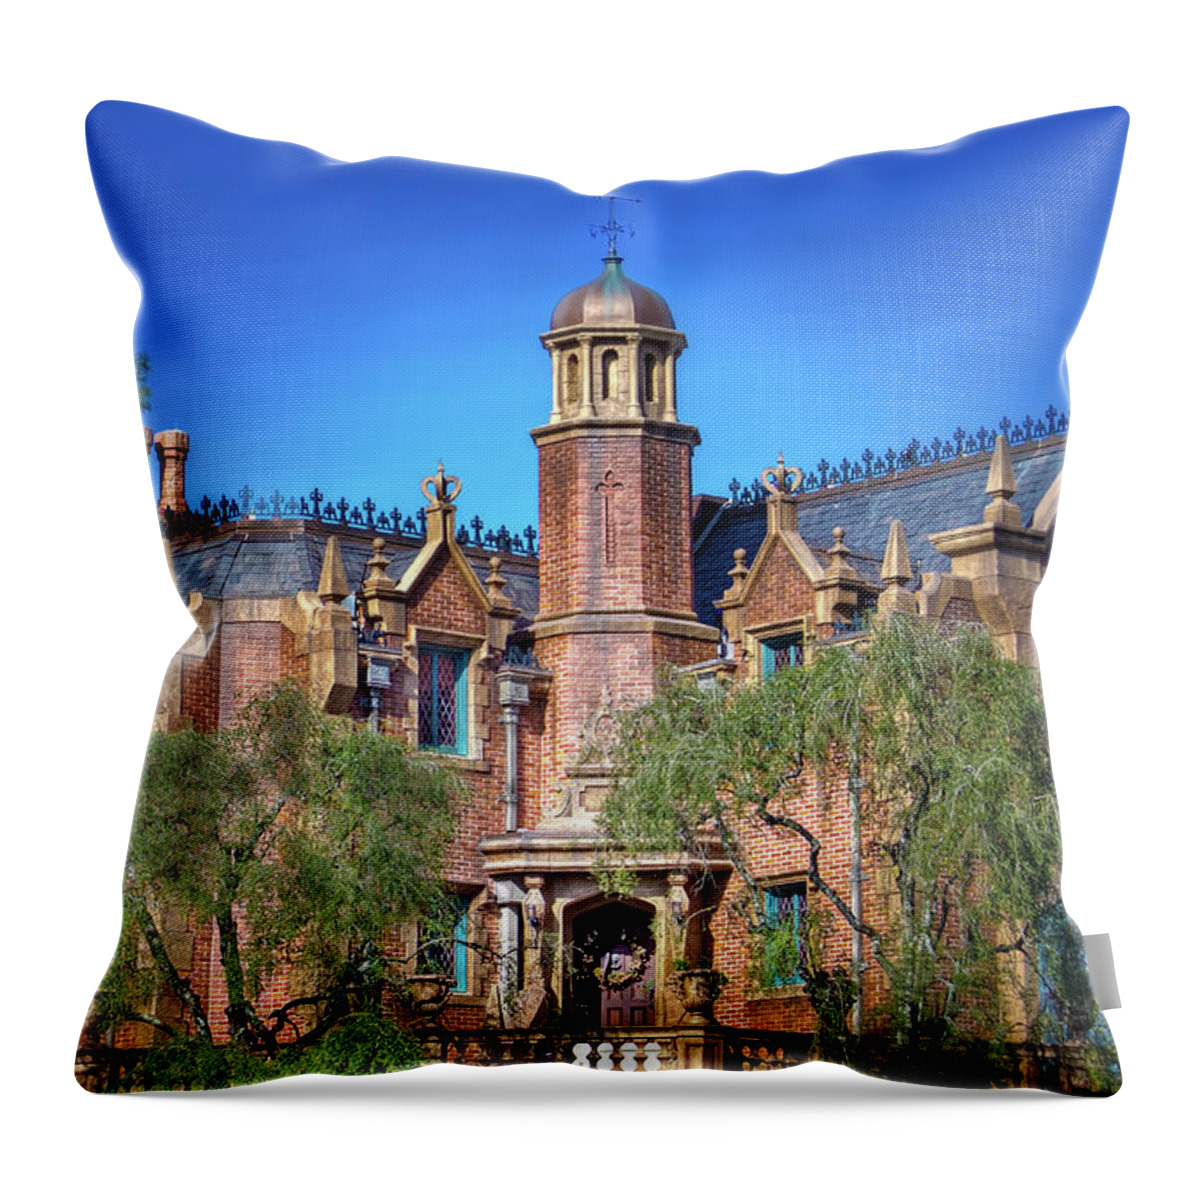 Magic Kingdom Throw Pillow featuring the photograph Disney World Haunted Mansion by Mark Andrew Thomas